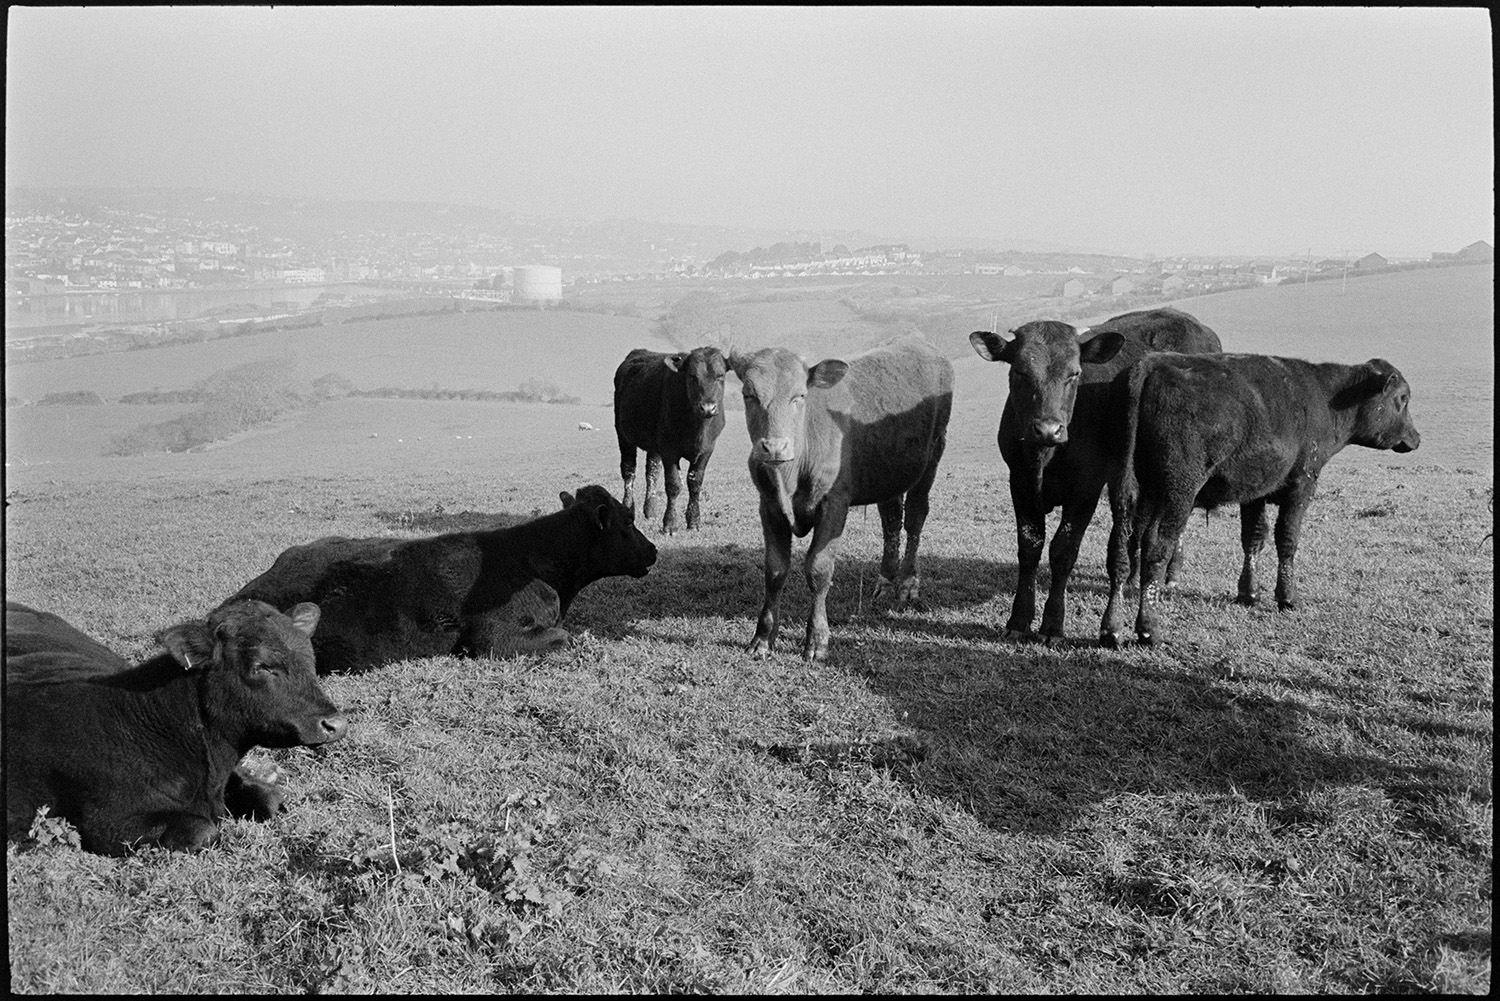 Cattle in mist, clearing. 
[Young cattle in a fields at Tennacott, Bideford. The town of Bideford can be seen in the background through the mist.]